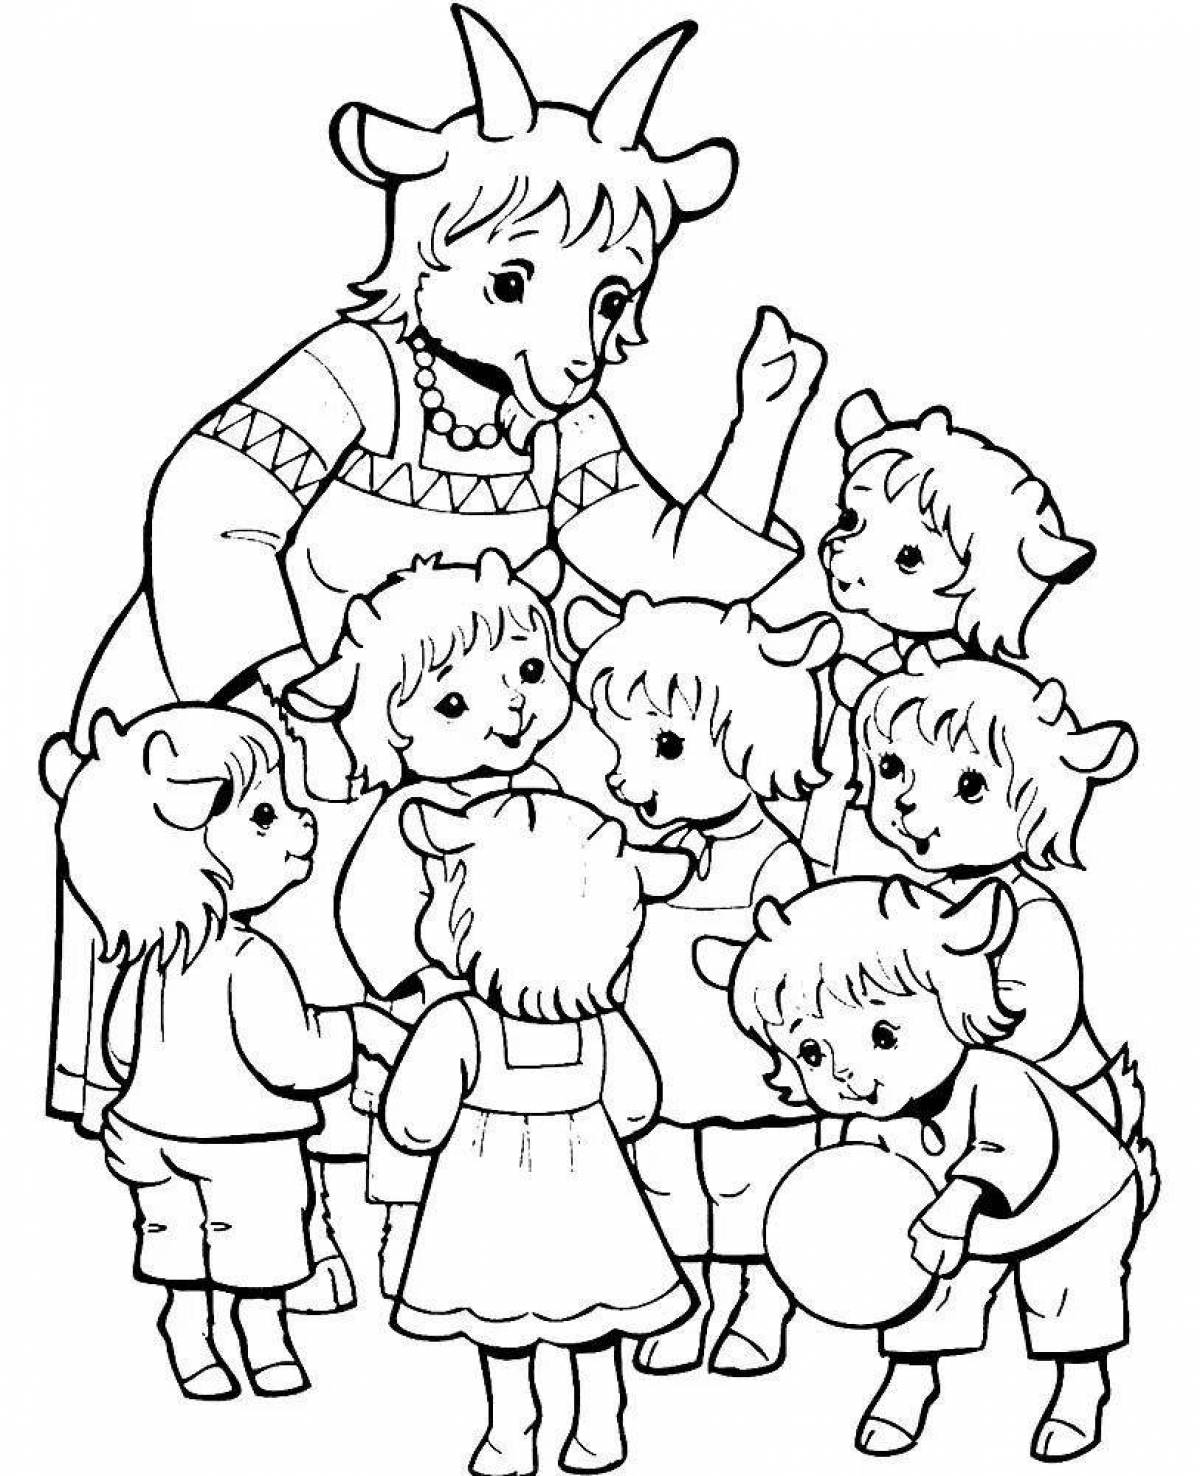 Goat and seven kids #1